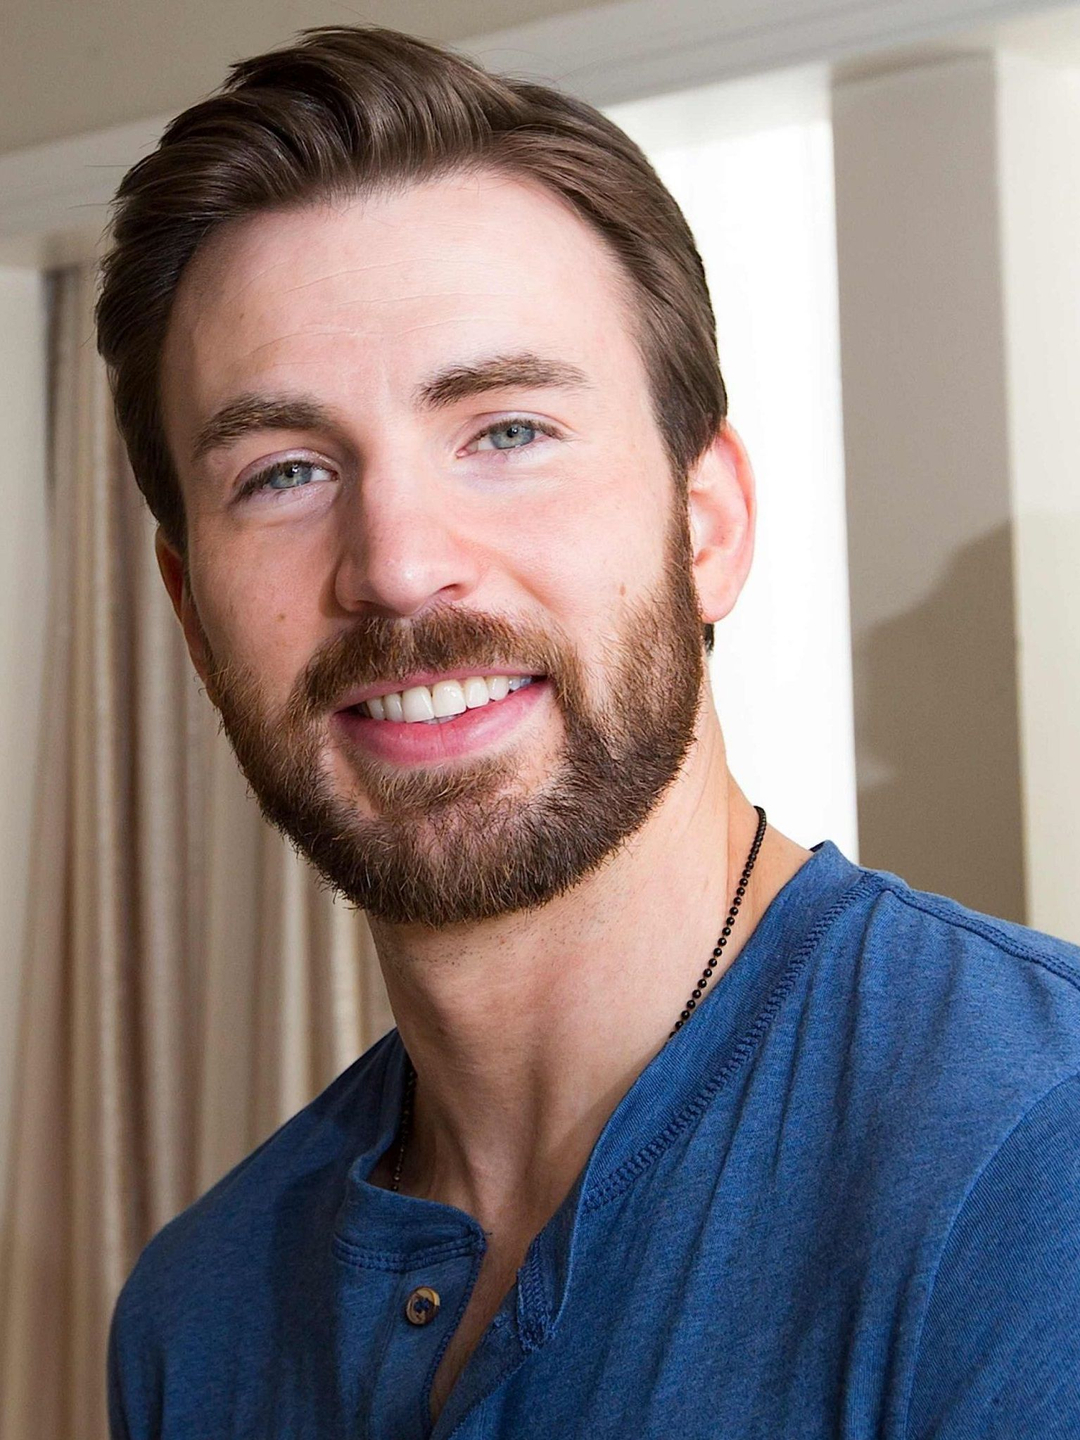 Chris Evans who are his parents